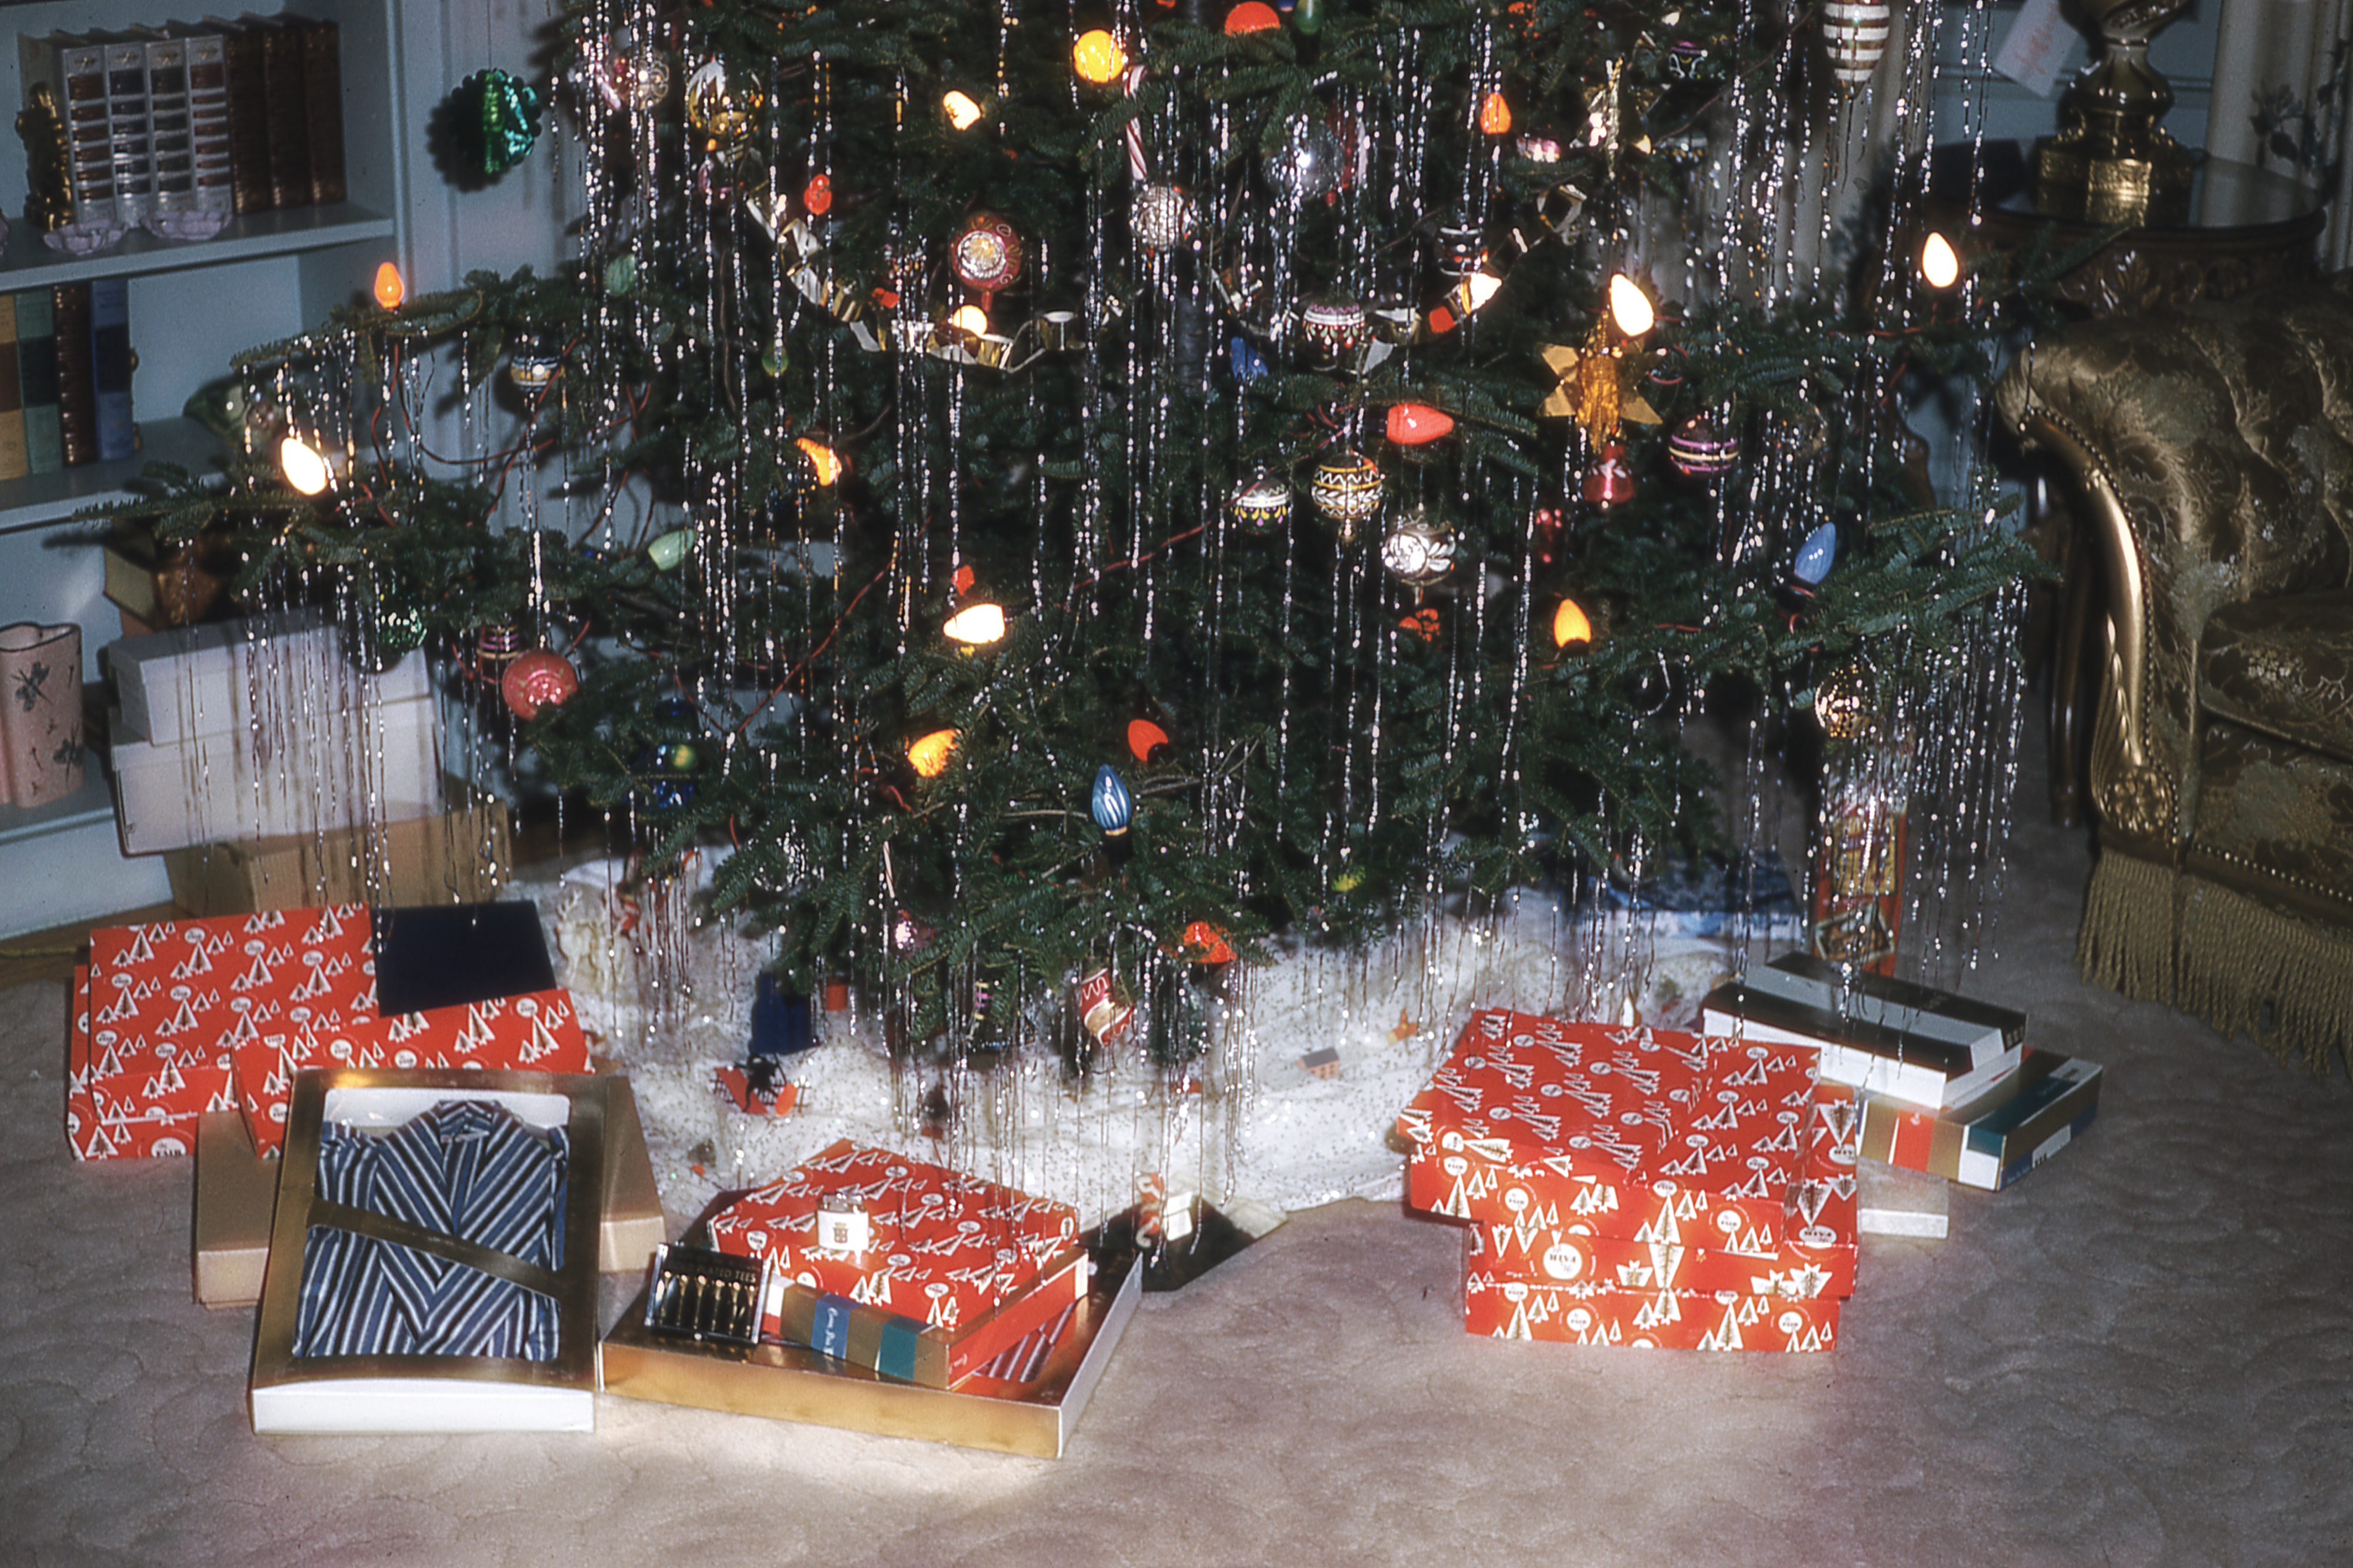 The base of a vintage Christmas tree, decorated with tinsel; presents are underneath